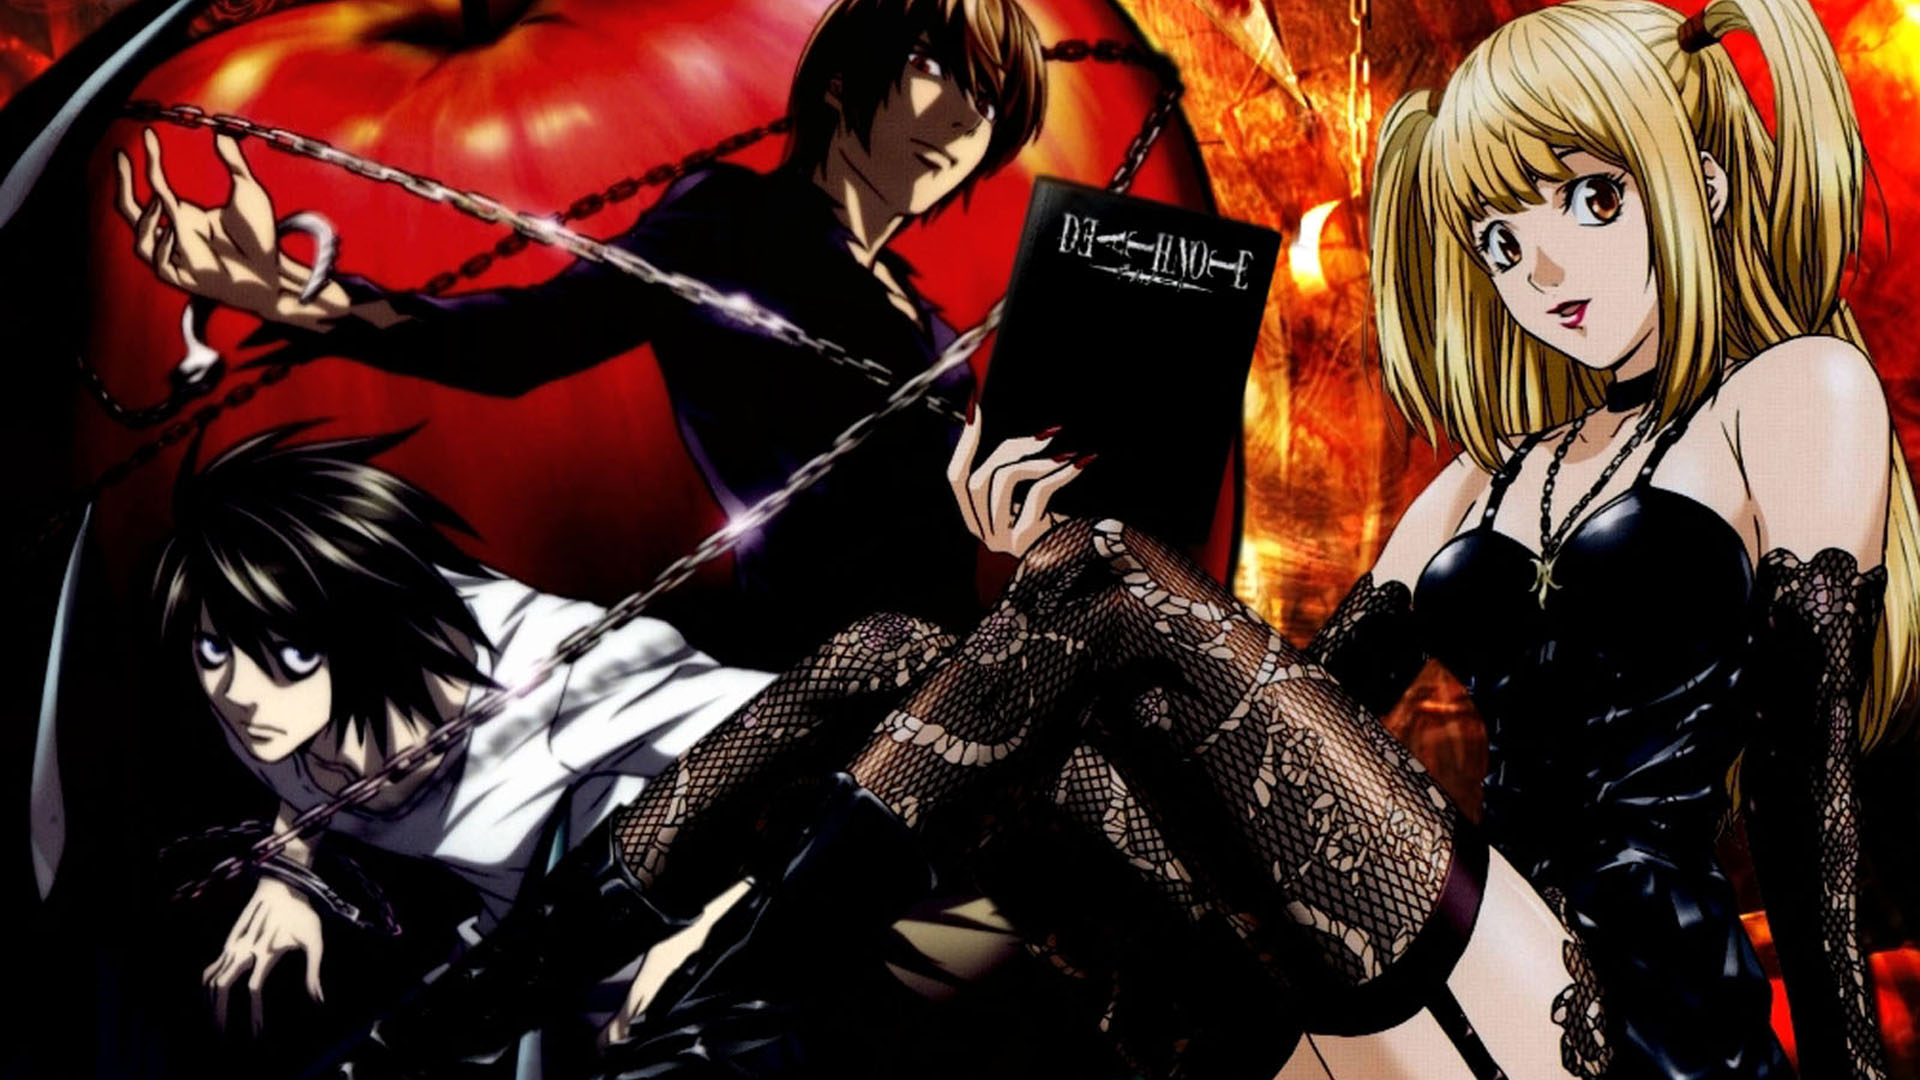 HD Death Note Image Kb Wallpaper And Pictures Bg